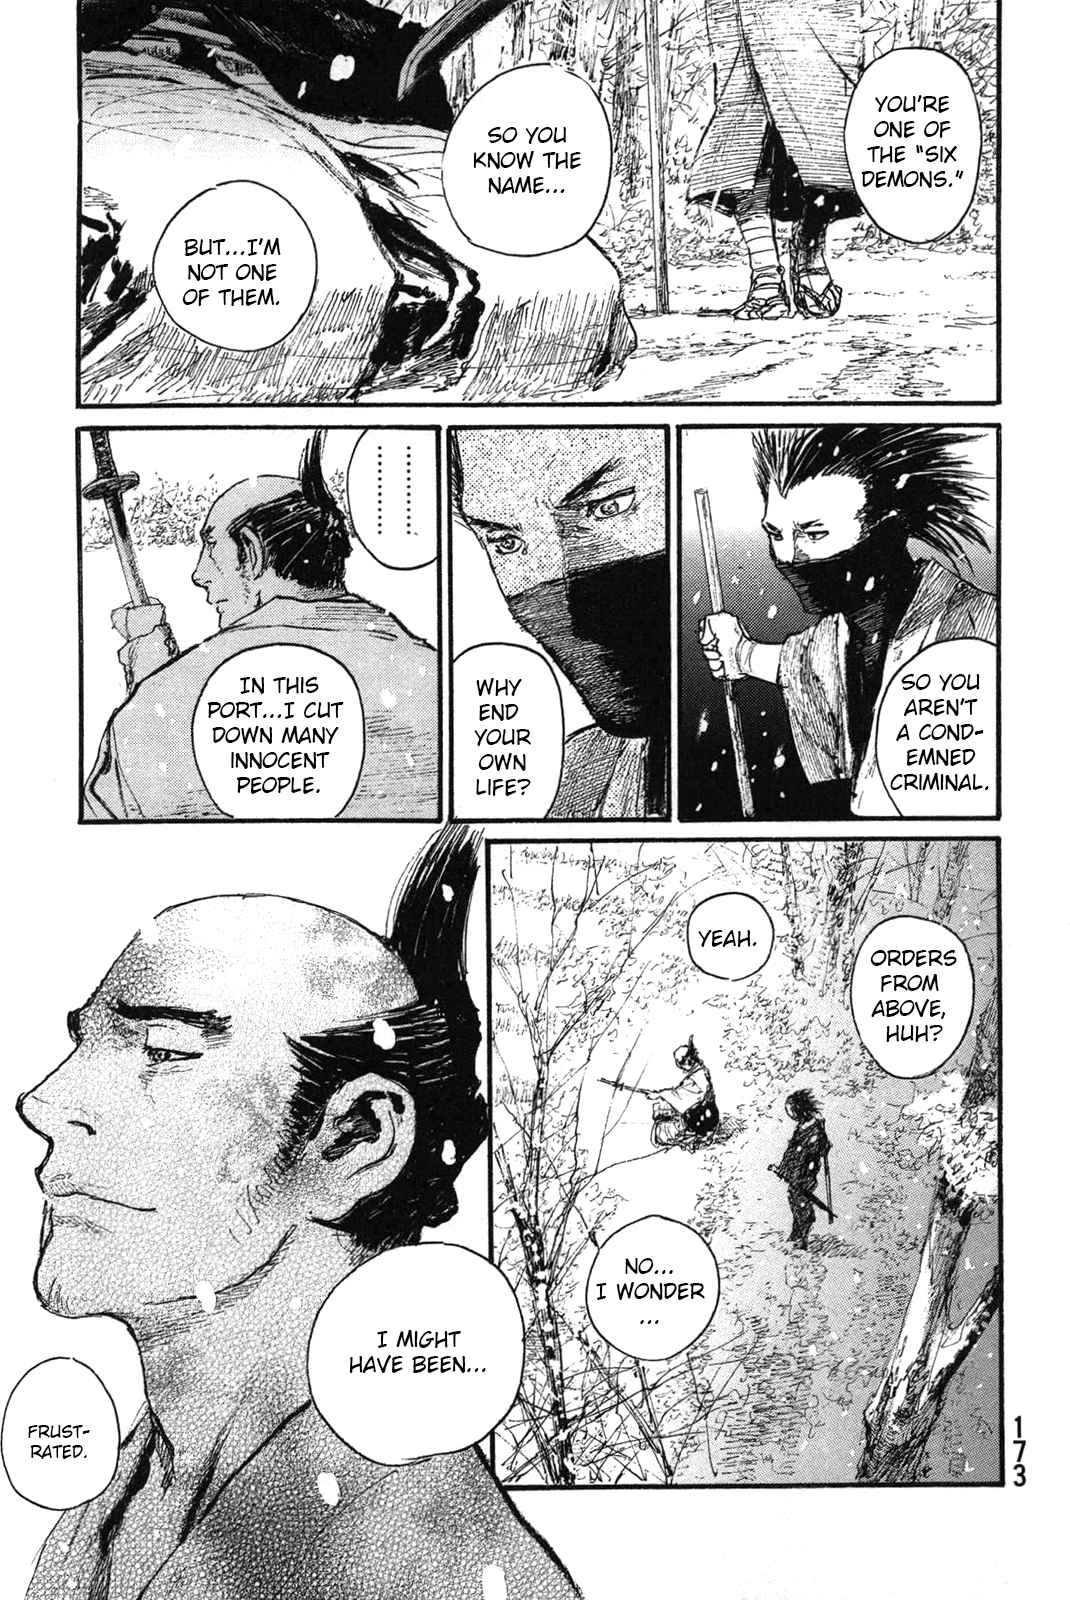 Blade of the Immortal Vol. 30 Ch. 203 Where Ferocious Winds Contest